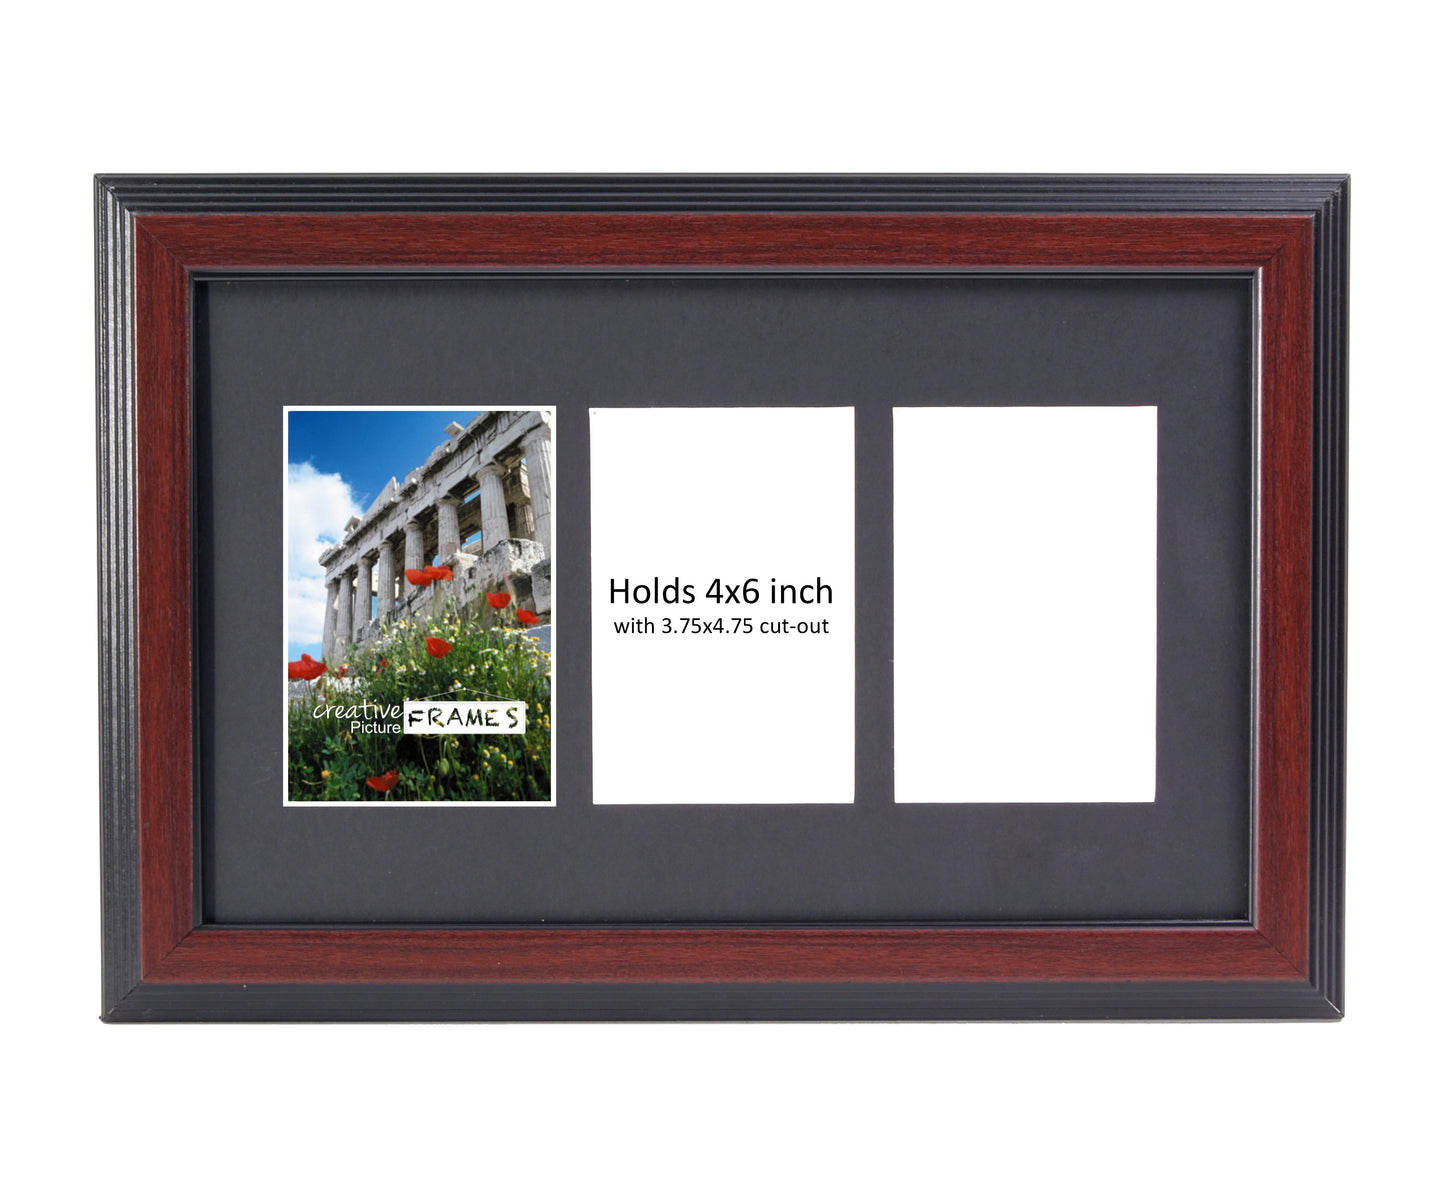 4x6-inch Multi Opening Mahogany Picture Frame